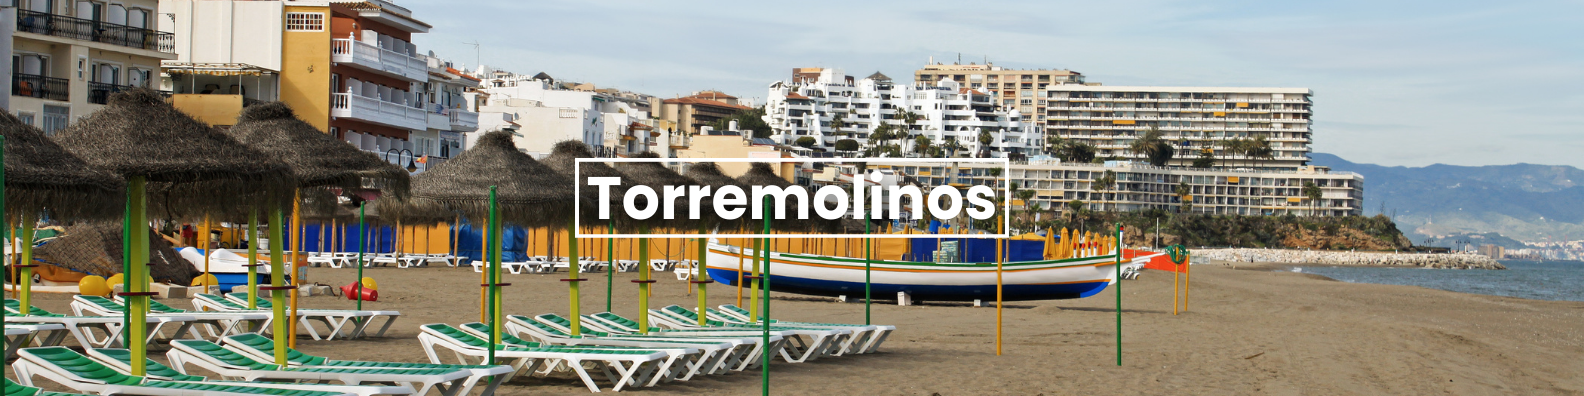 a picture of a beach with the words torremolinos on it Barter's Travelnet 